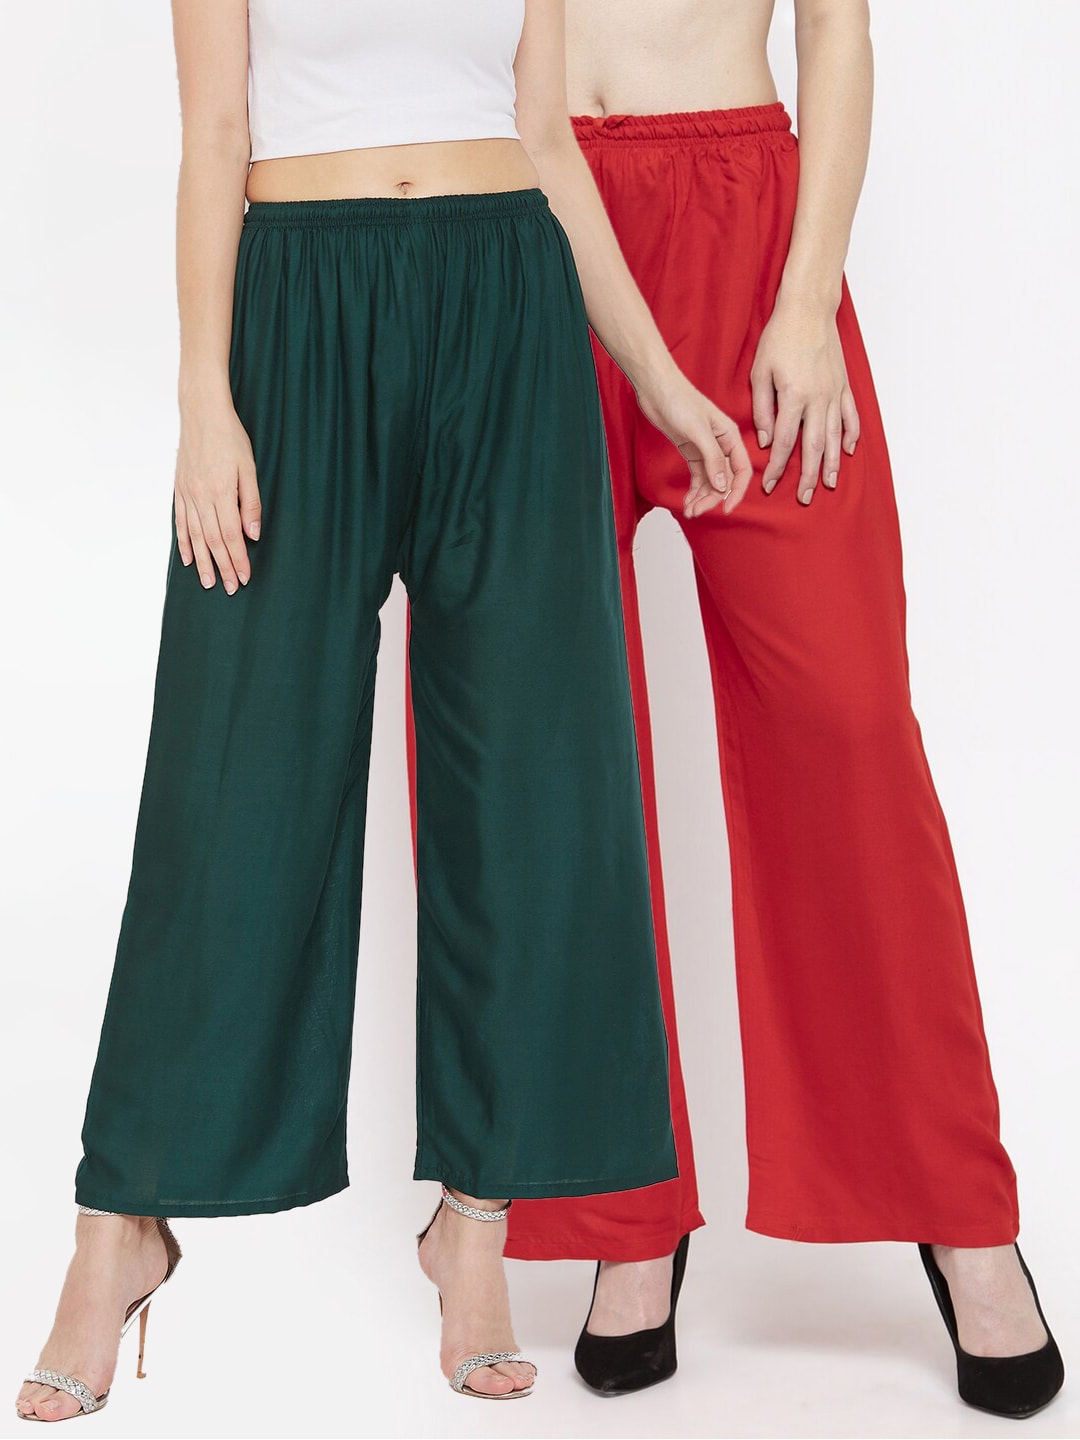 Clora Creation Women Set Of 2 Green & Red Ethnic Palazzos Price in India